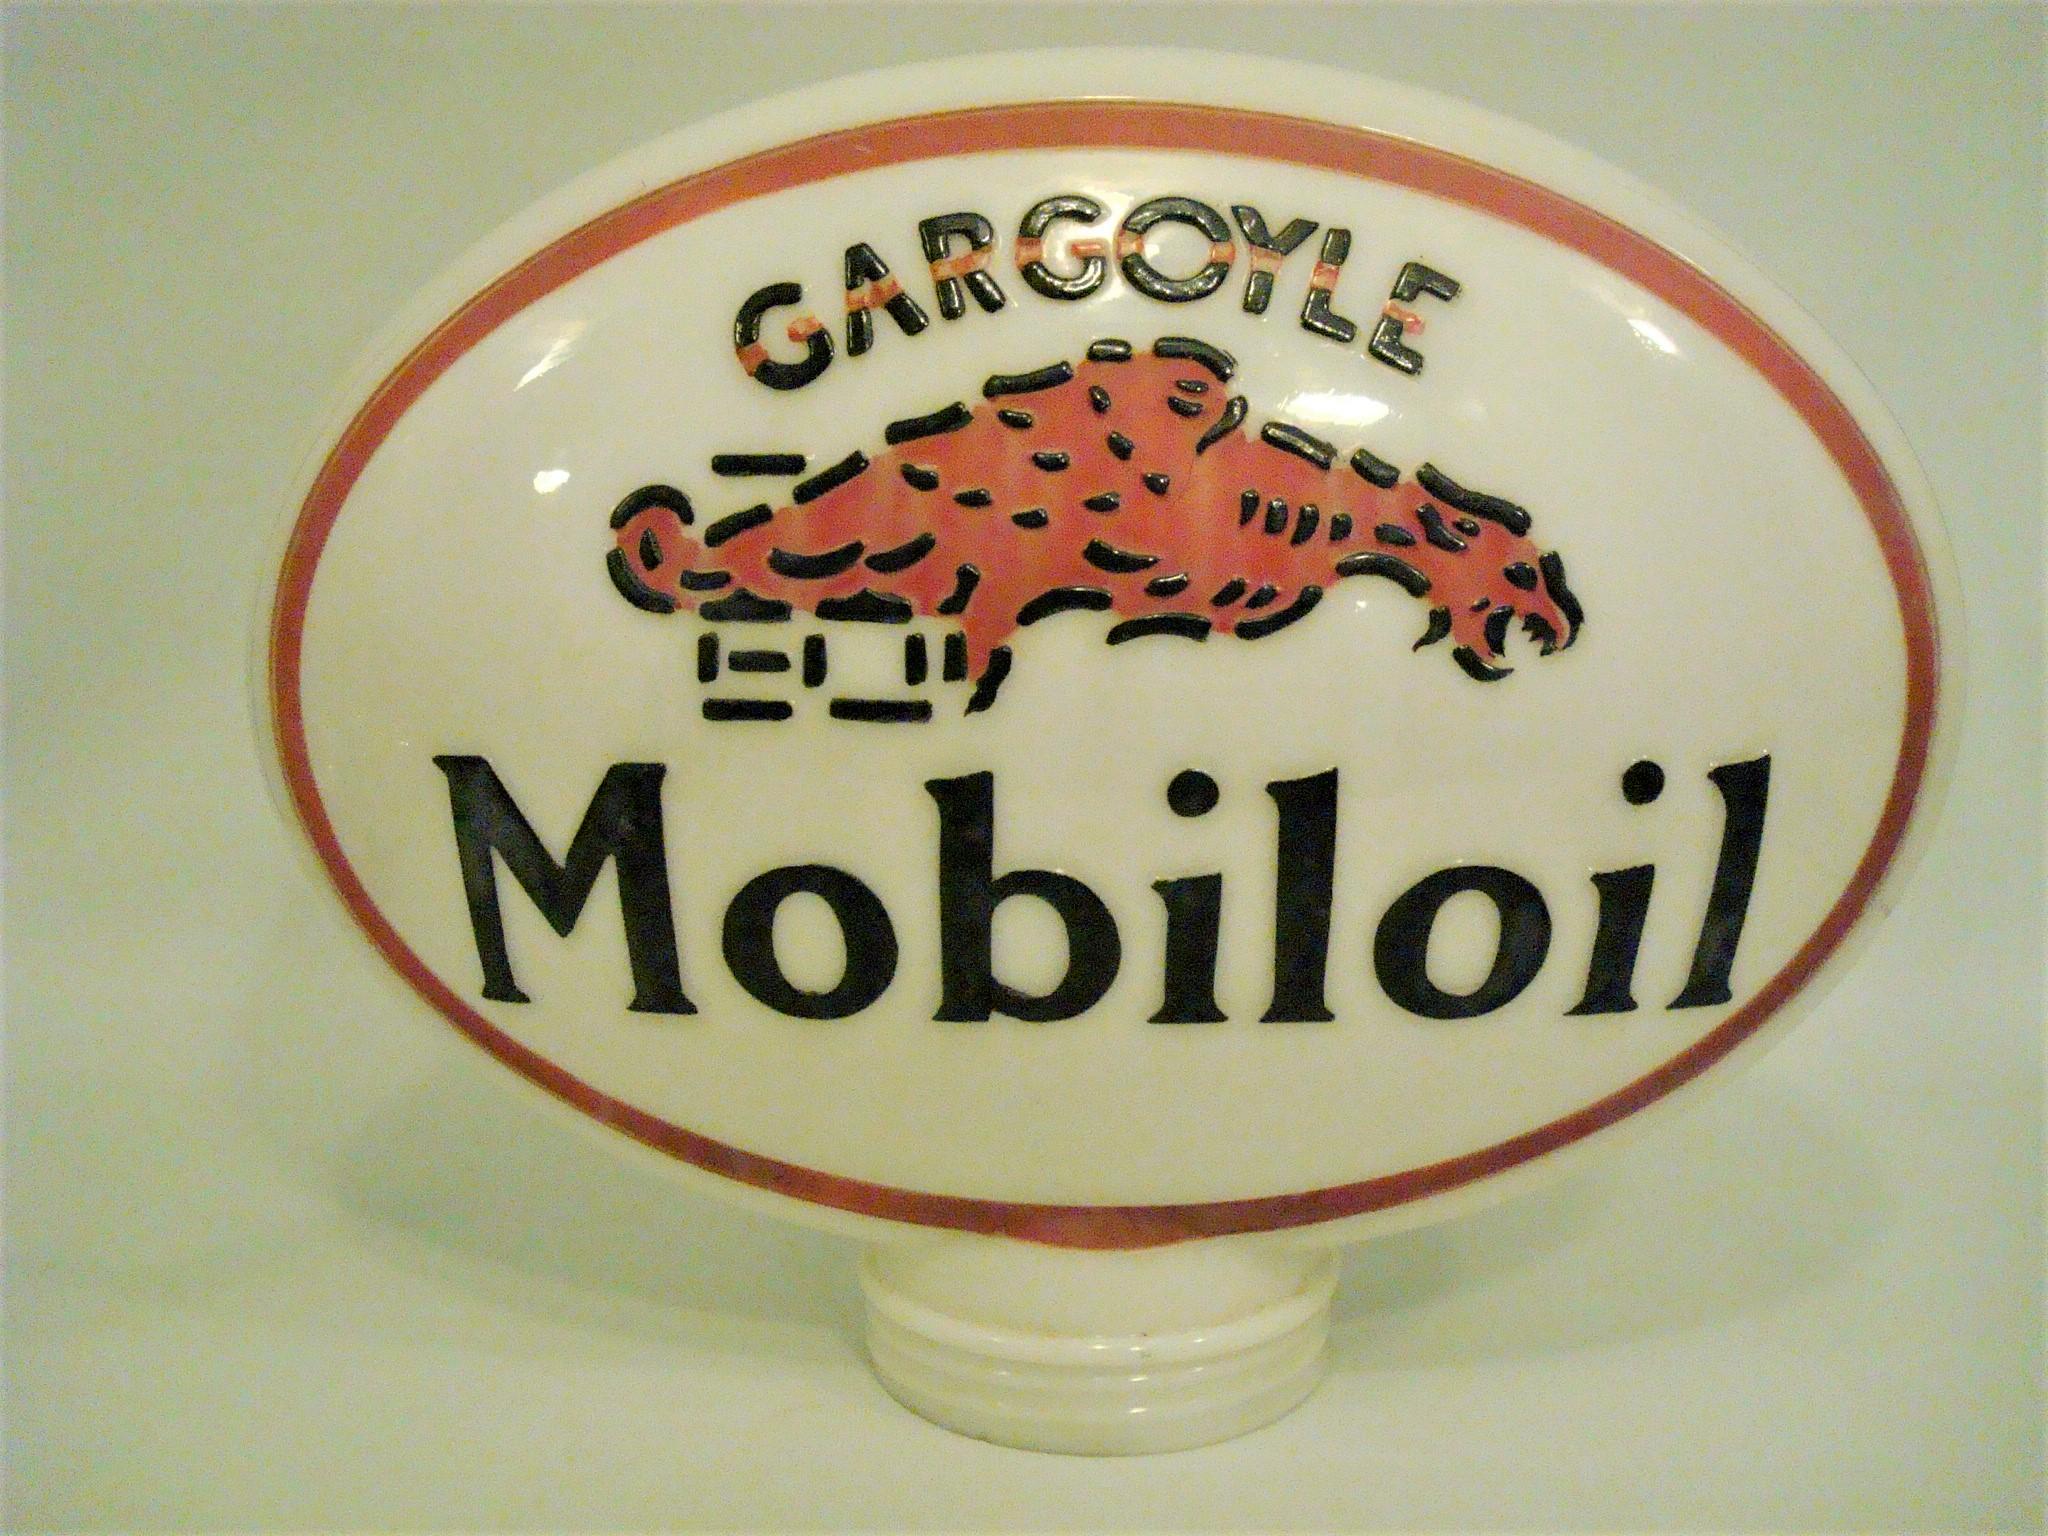 20th Century Gargoyle Moboloil Gas Pump Globe, Double Sided, with raised letter and logo For Sale